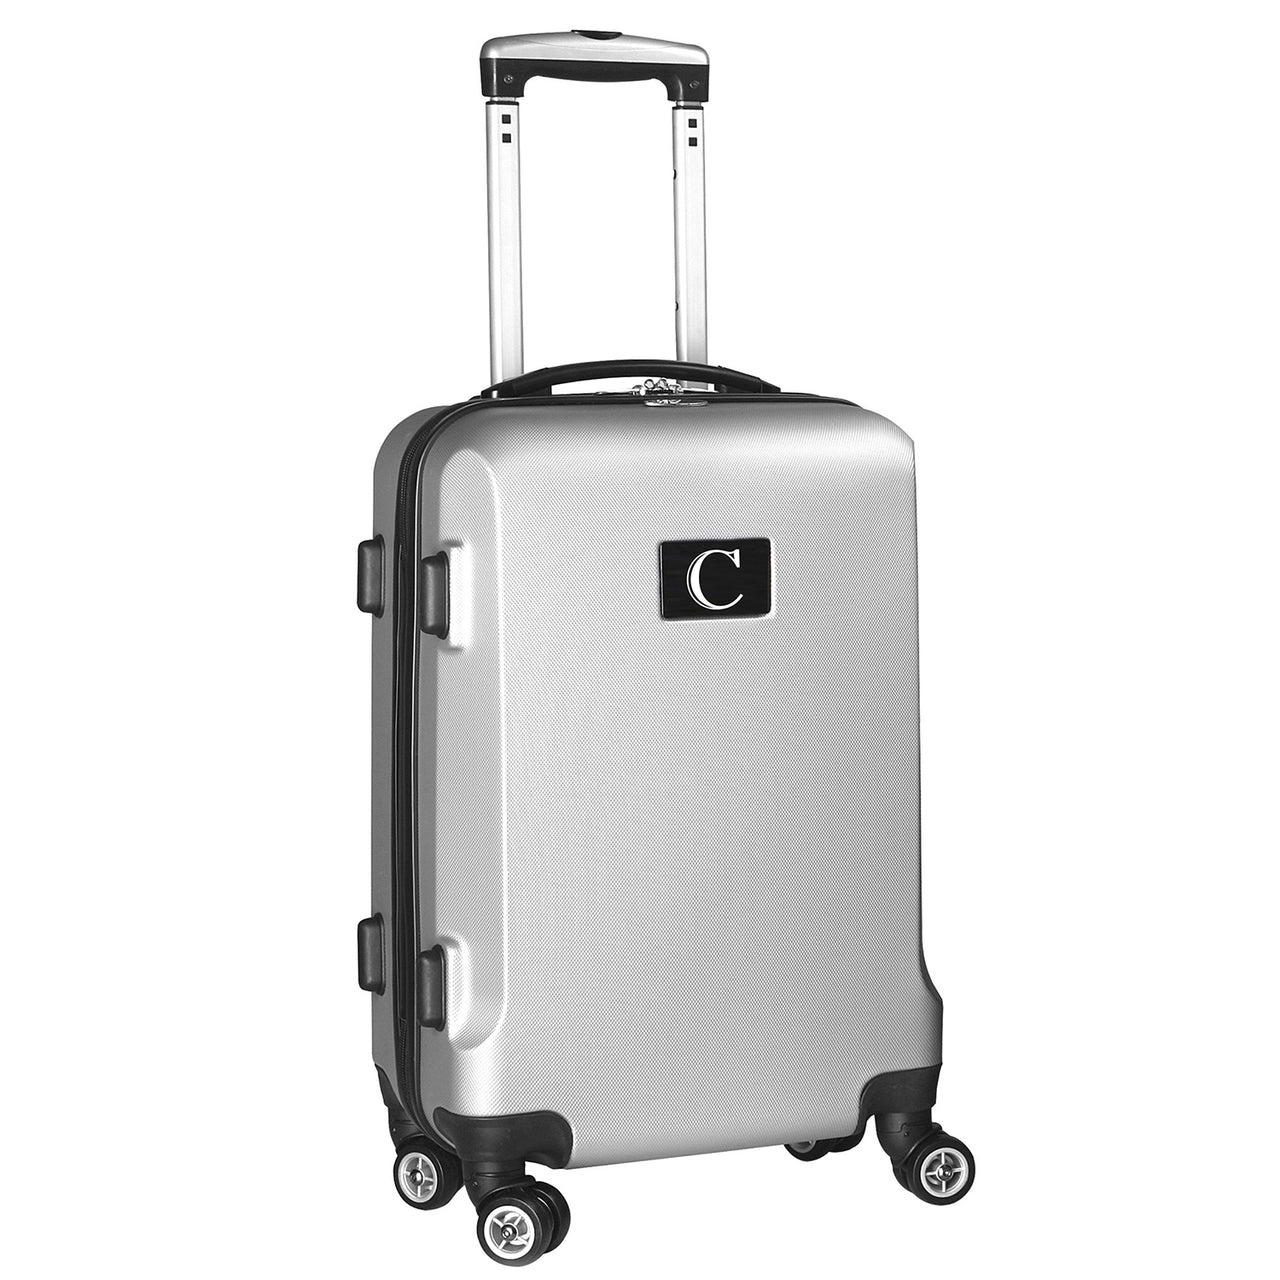 Personalized Initial Name letter "C" 20 inches Carry on Hardcase Spinner Luggage by Mojo in SILVER